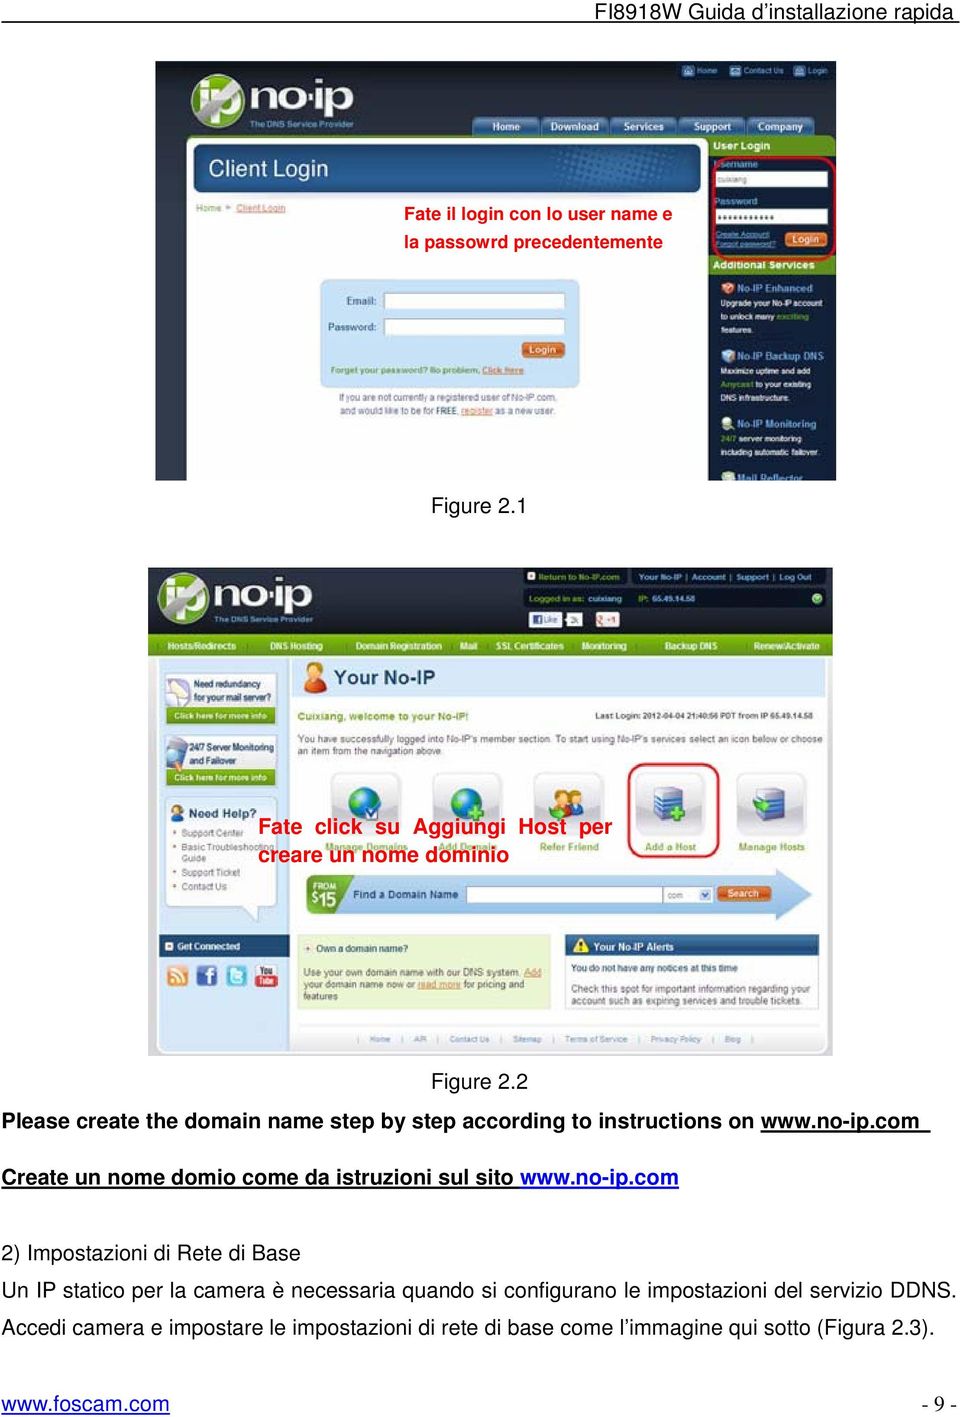 2 Please create the domain name step by step according to instructions on www.no-ip.